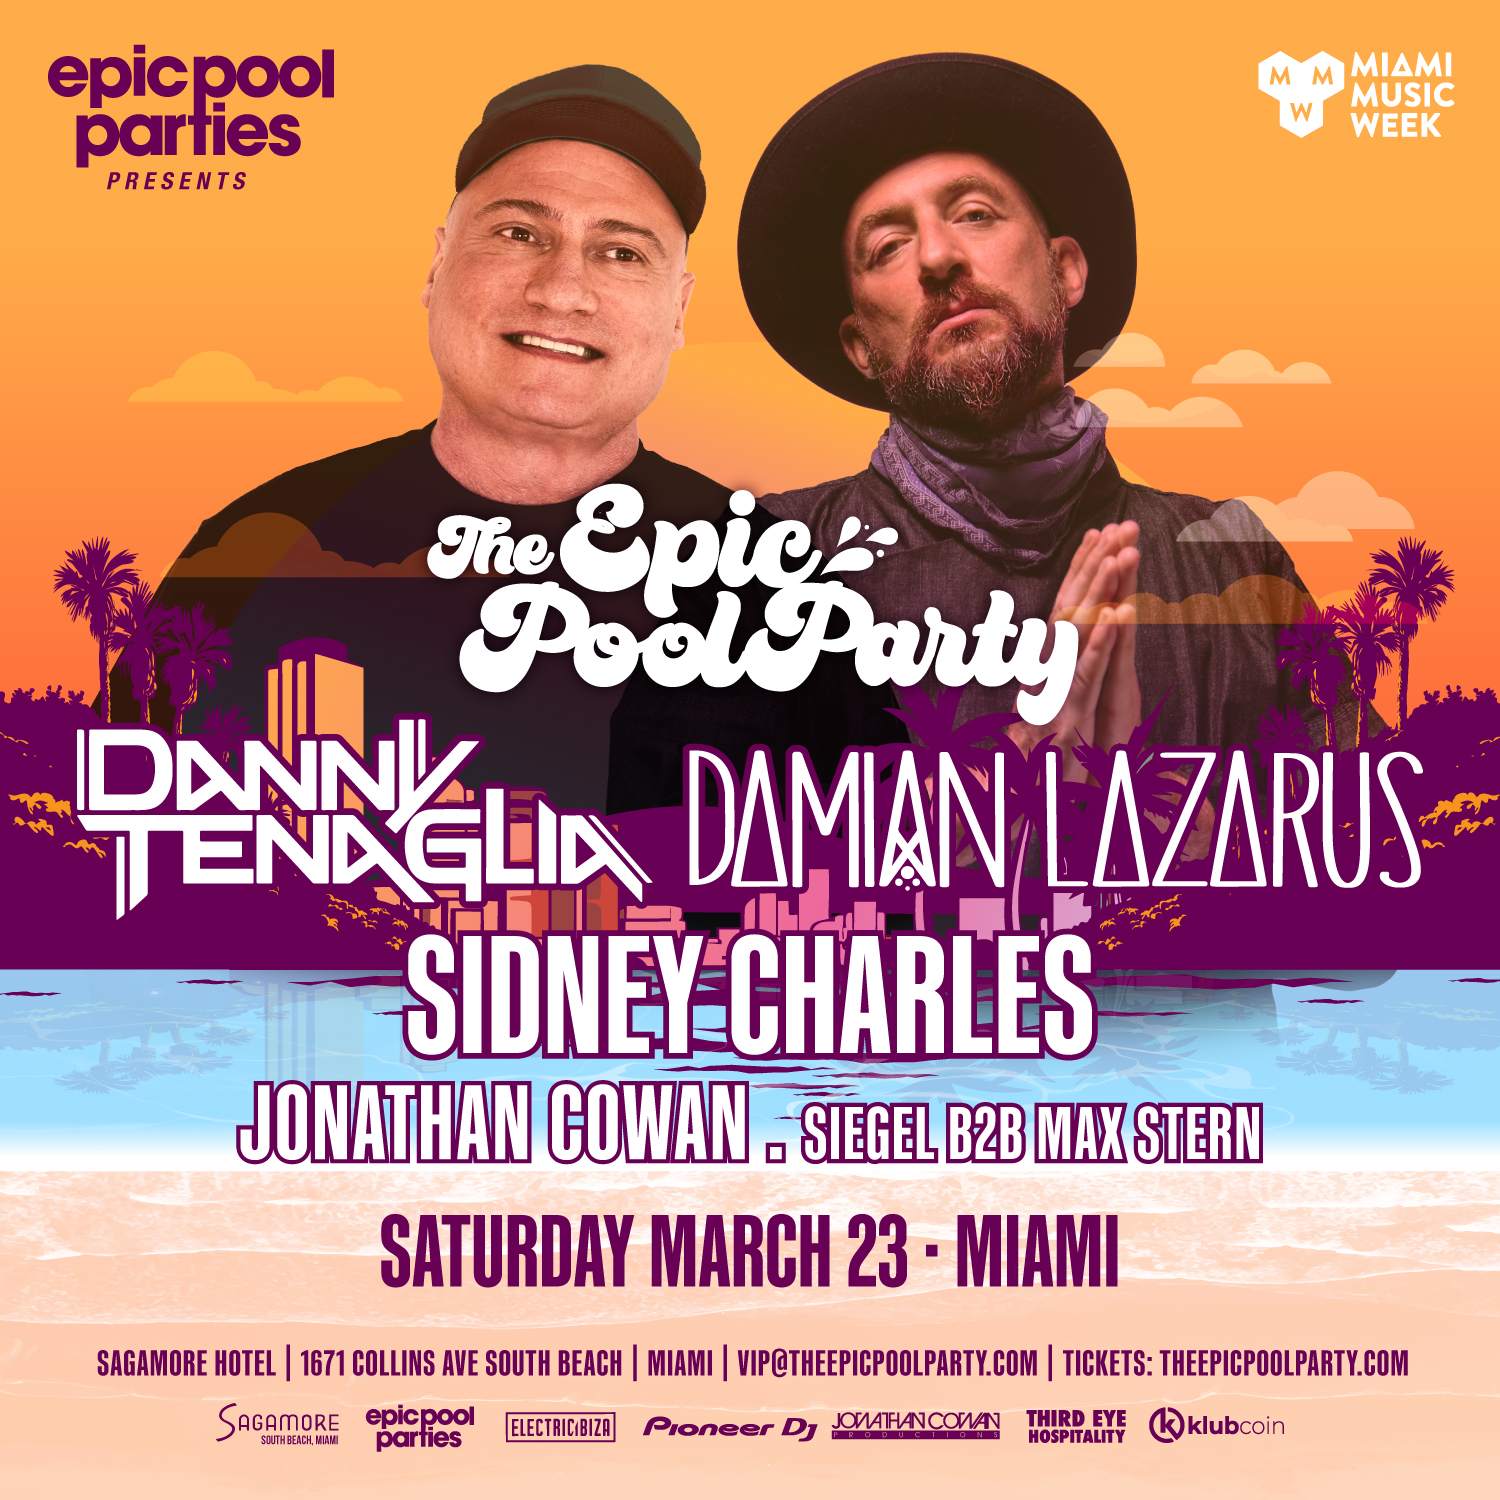 EPIC POOL PARTIES - DAY 4 - Danny Tenaglia - Damian Lazarus (Extended Sets) - フライヤー表